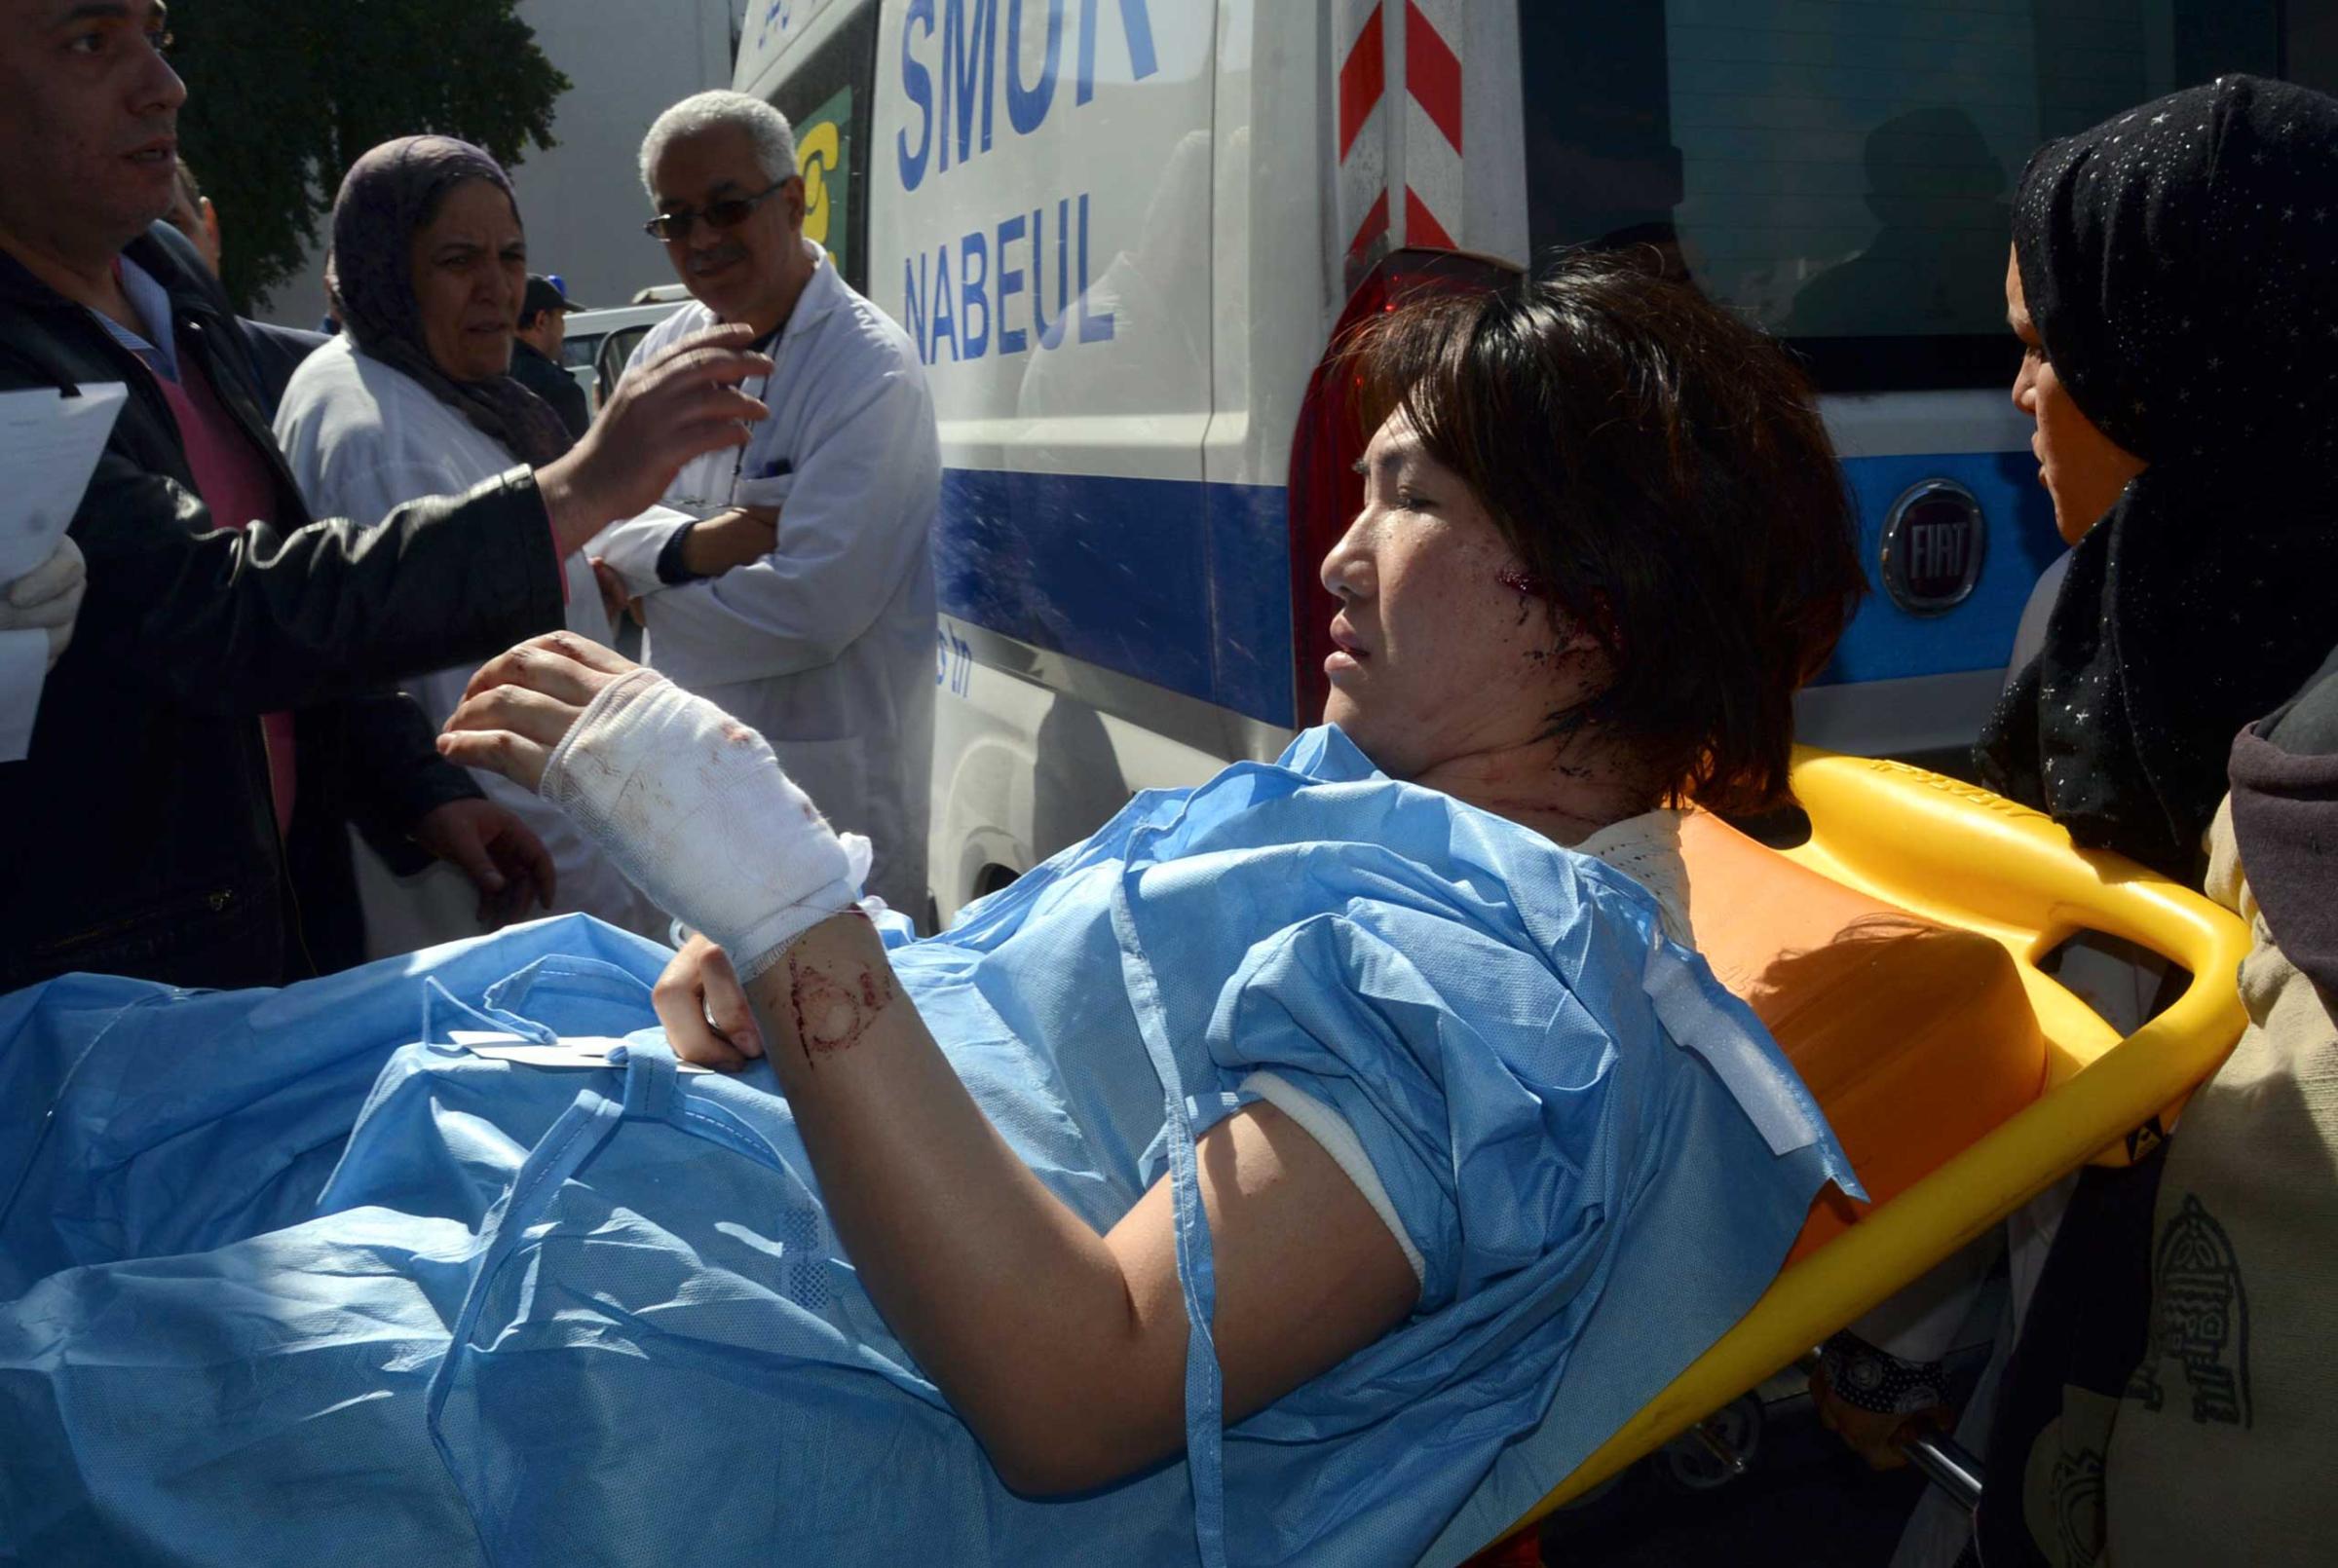 A victim arrives at the Charles Nicoles hospital, Wednesday, March 18, 2015 in Tunis.